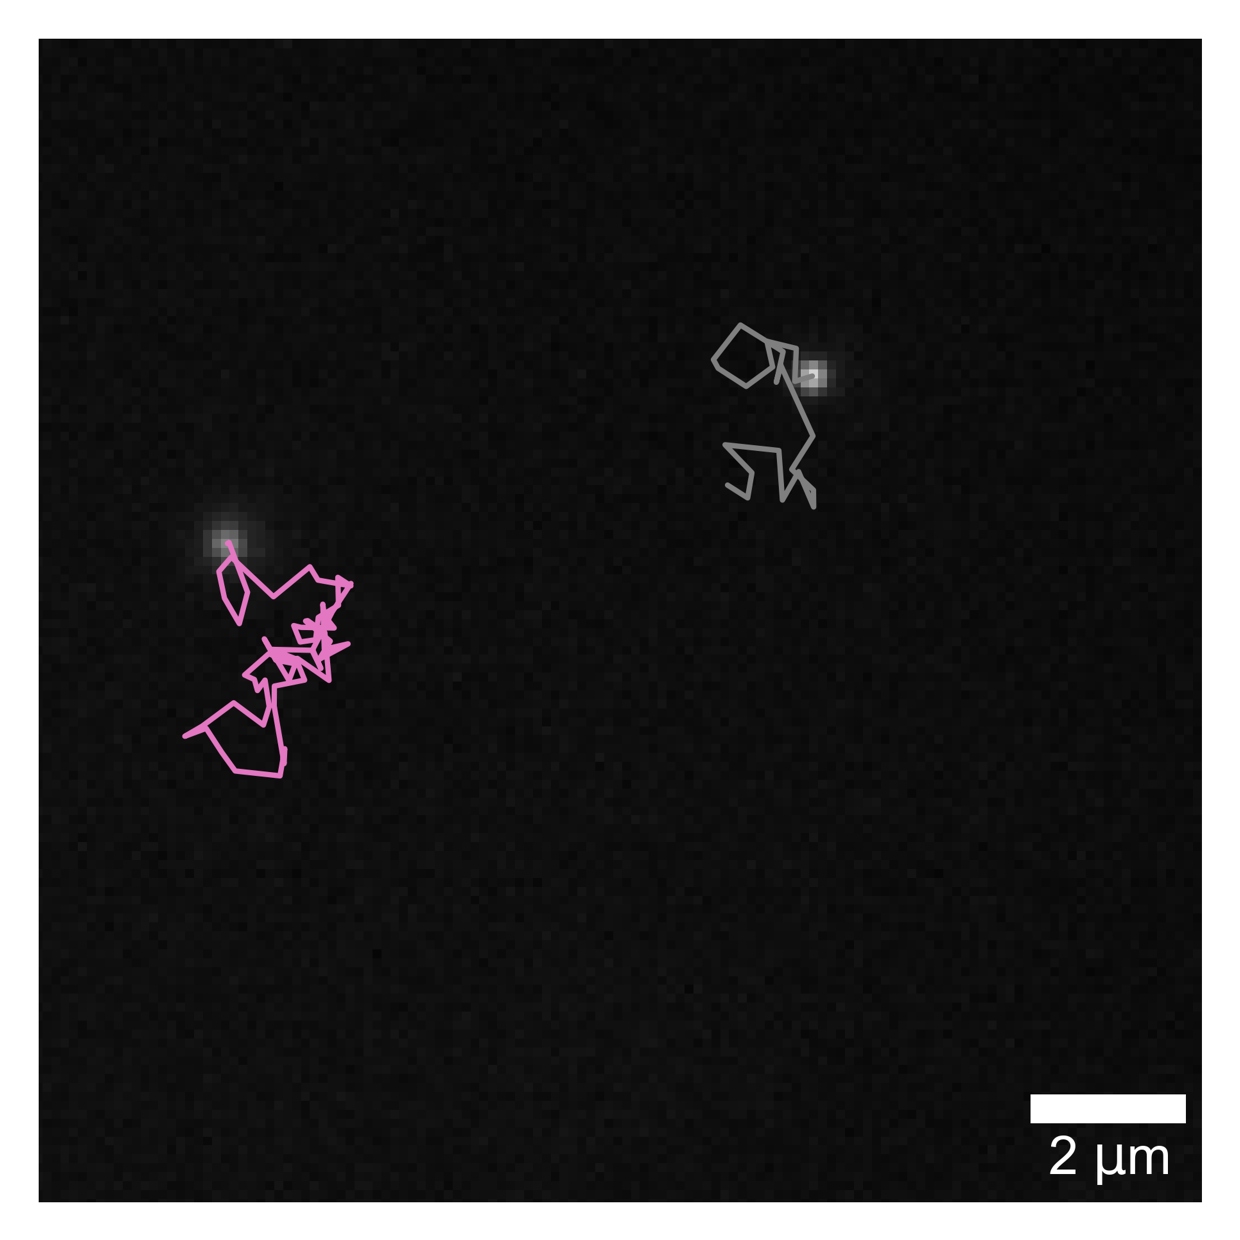 Fluorescent Single particle tracking of nanoparticles